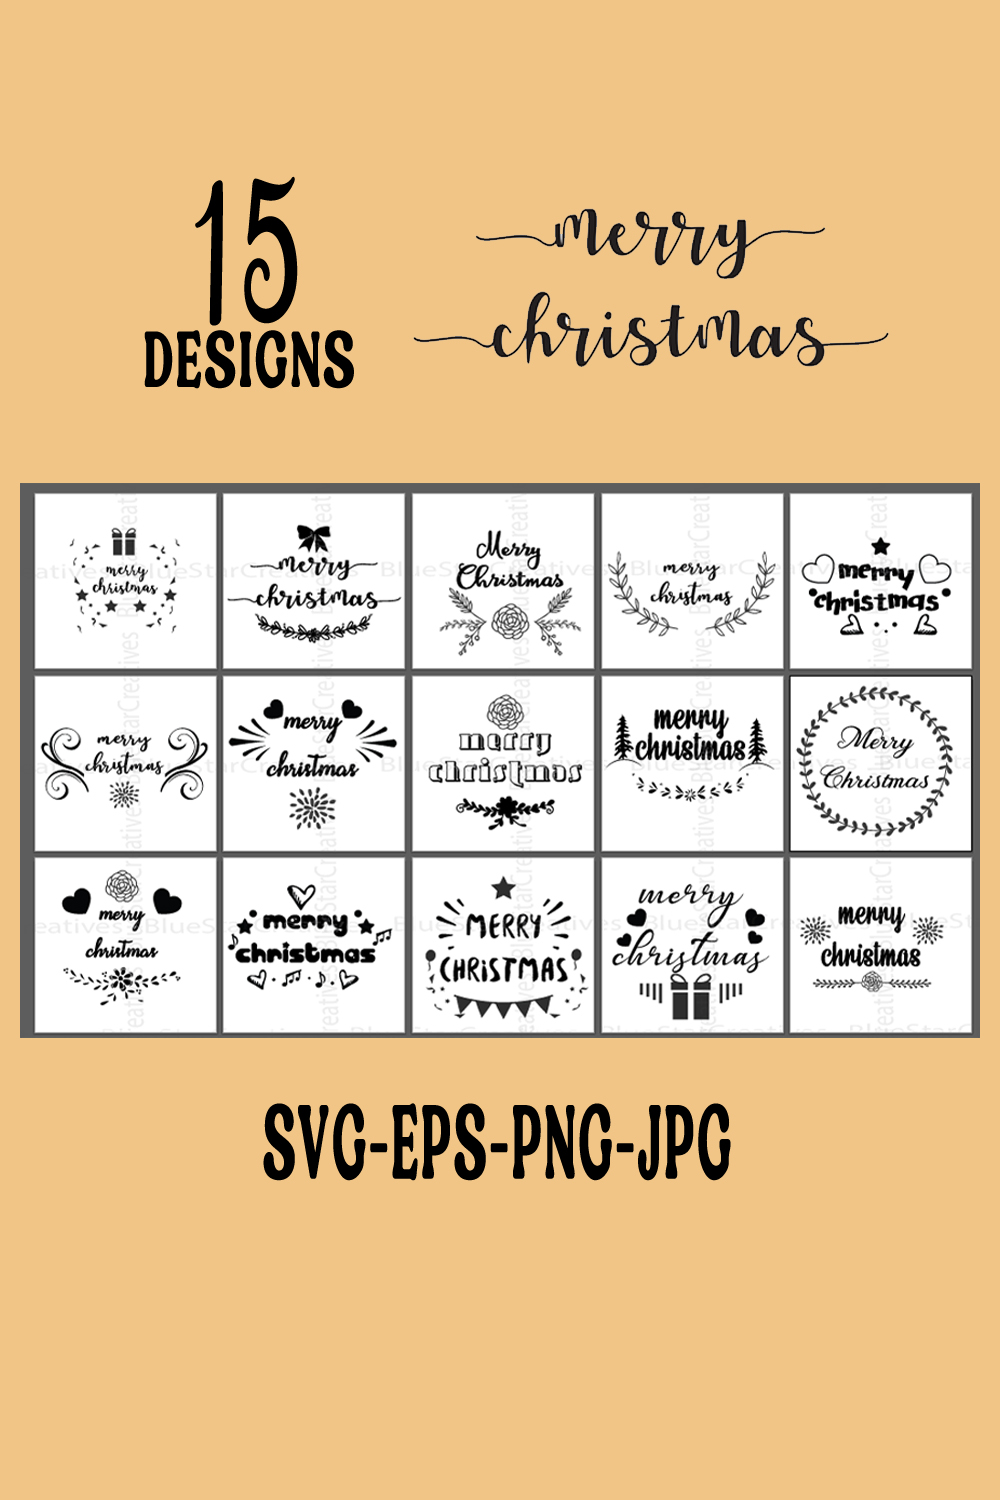 Merry Christmas Bundle-SVG-EPS-PNG-JPG pinterest preview image.